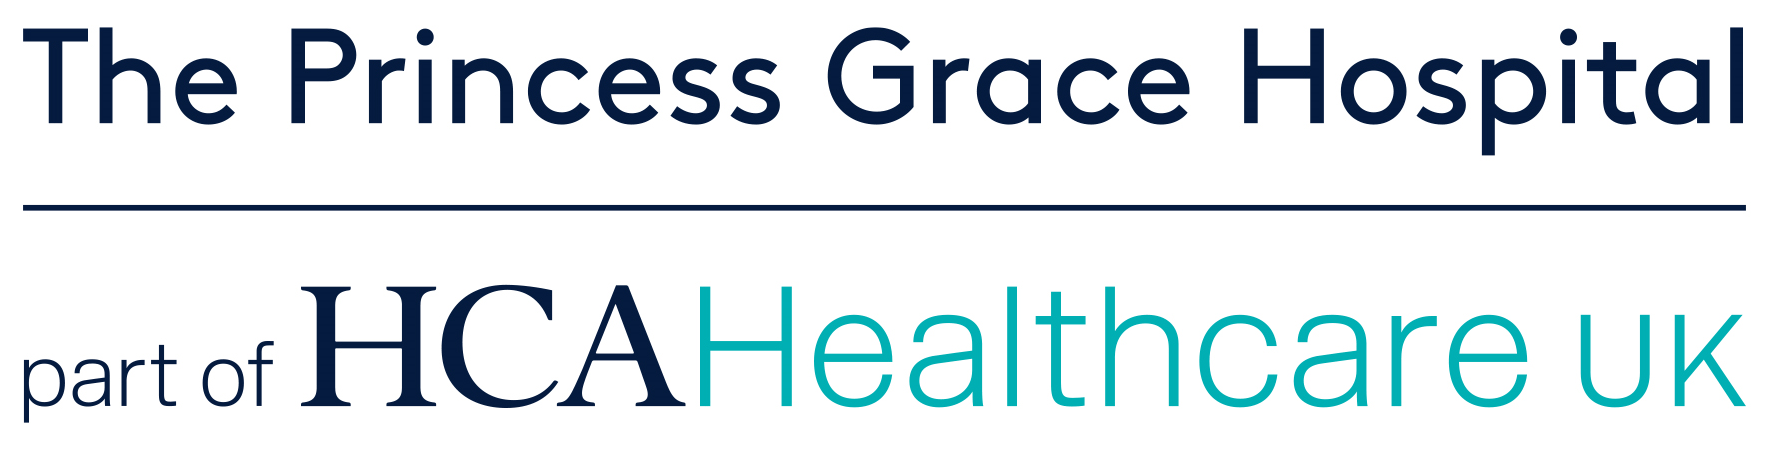 https://www.myhealthspecialist.com/assets/images/uploads/pgh_clinic_badge_1636721074303.png